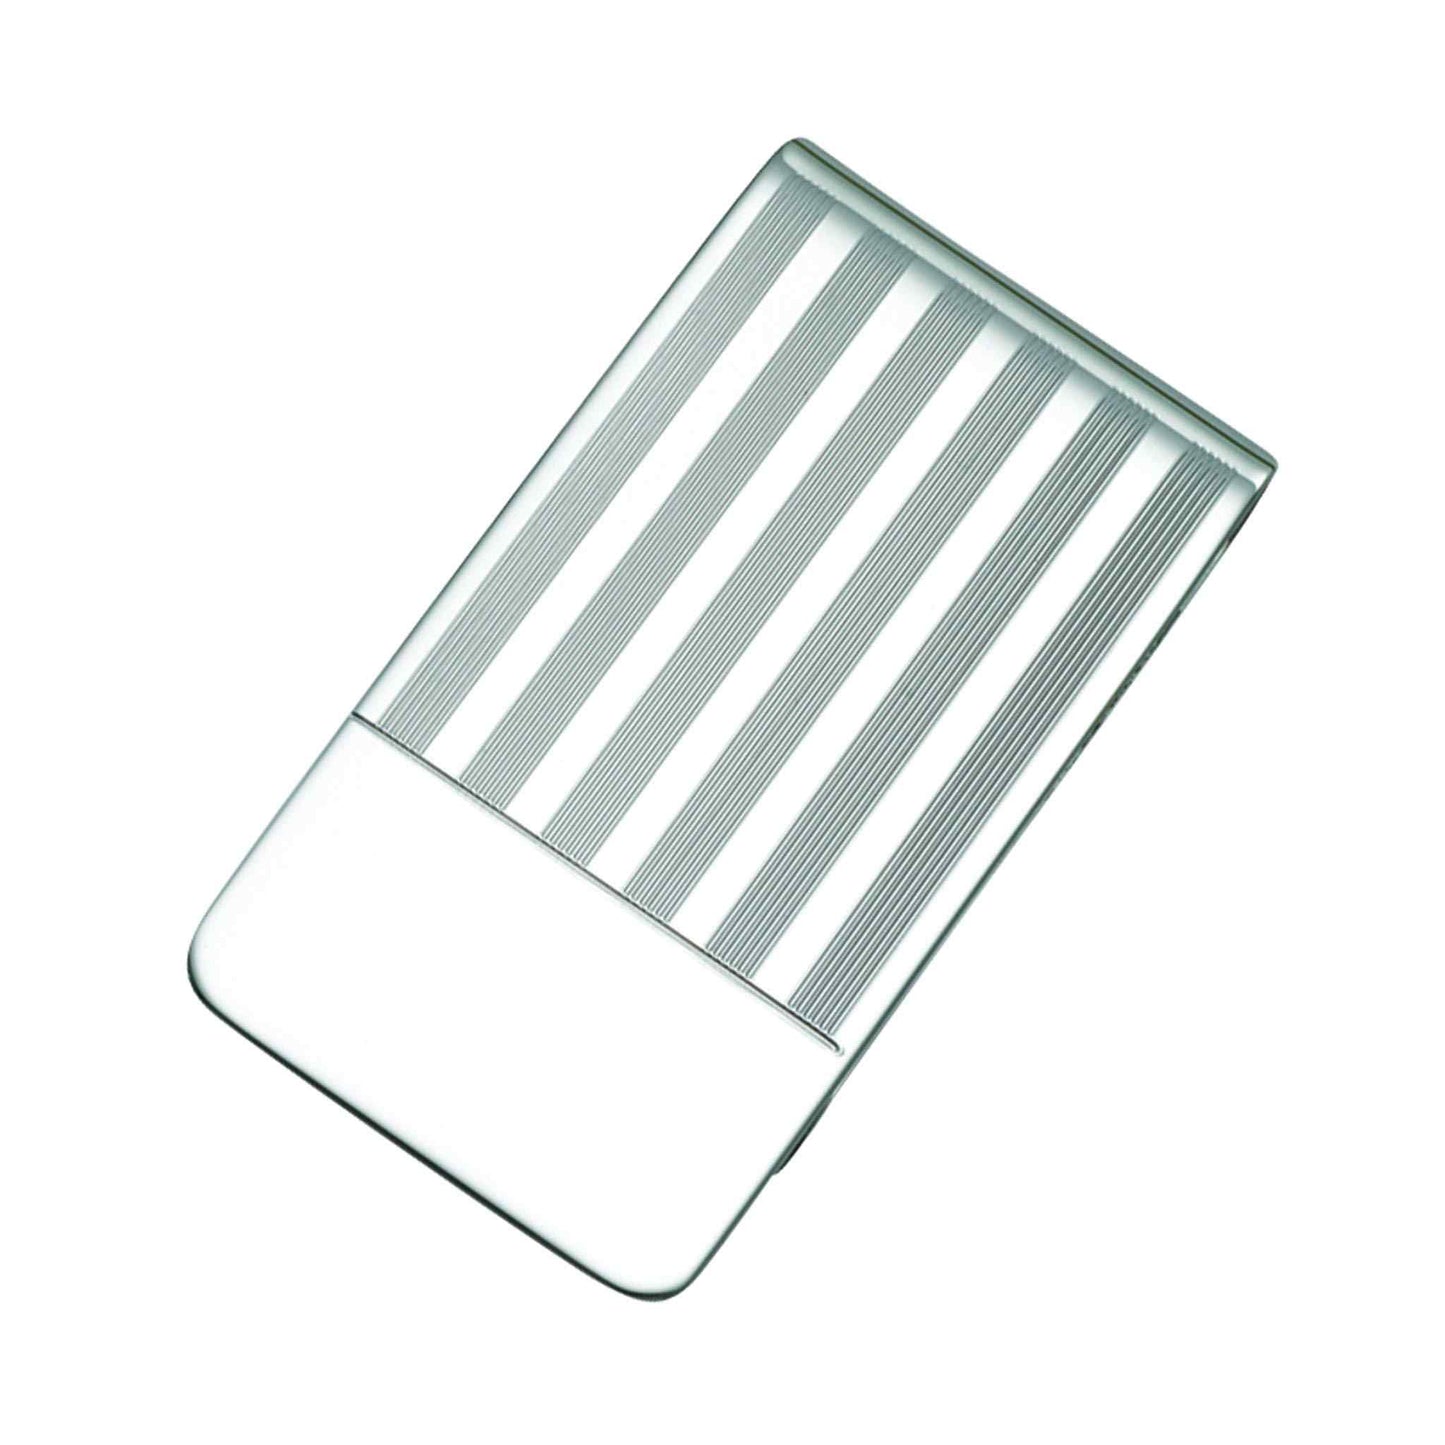 A 1" sterling silver money clip engine-turned end signet displayed on a neutral white background.